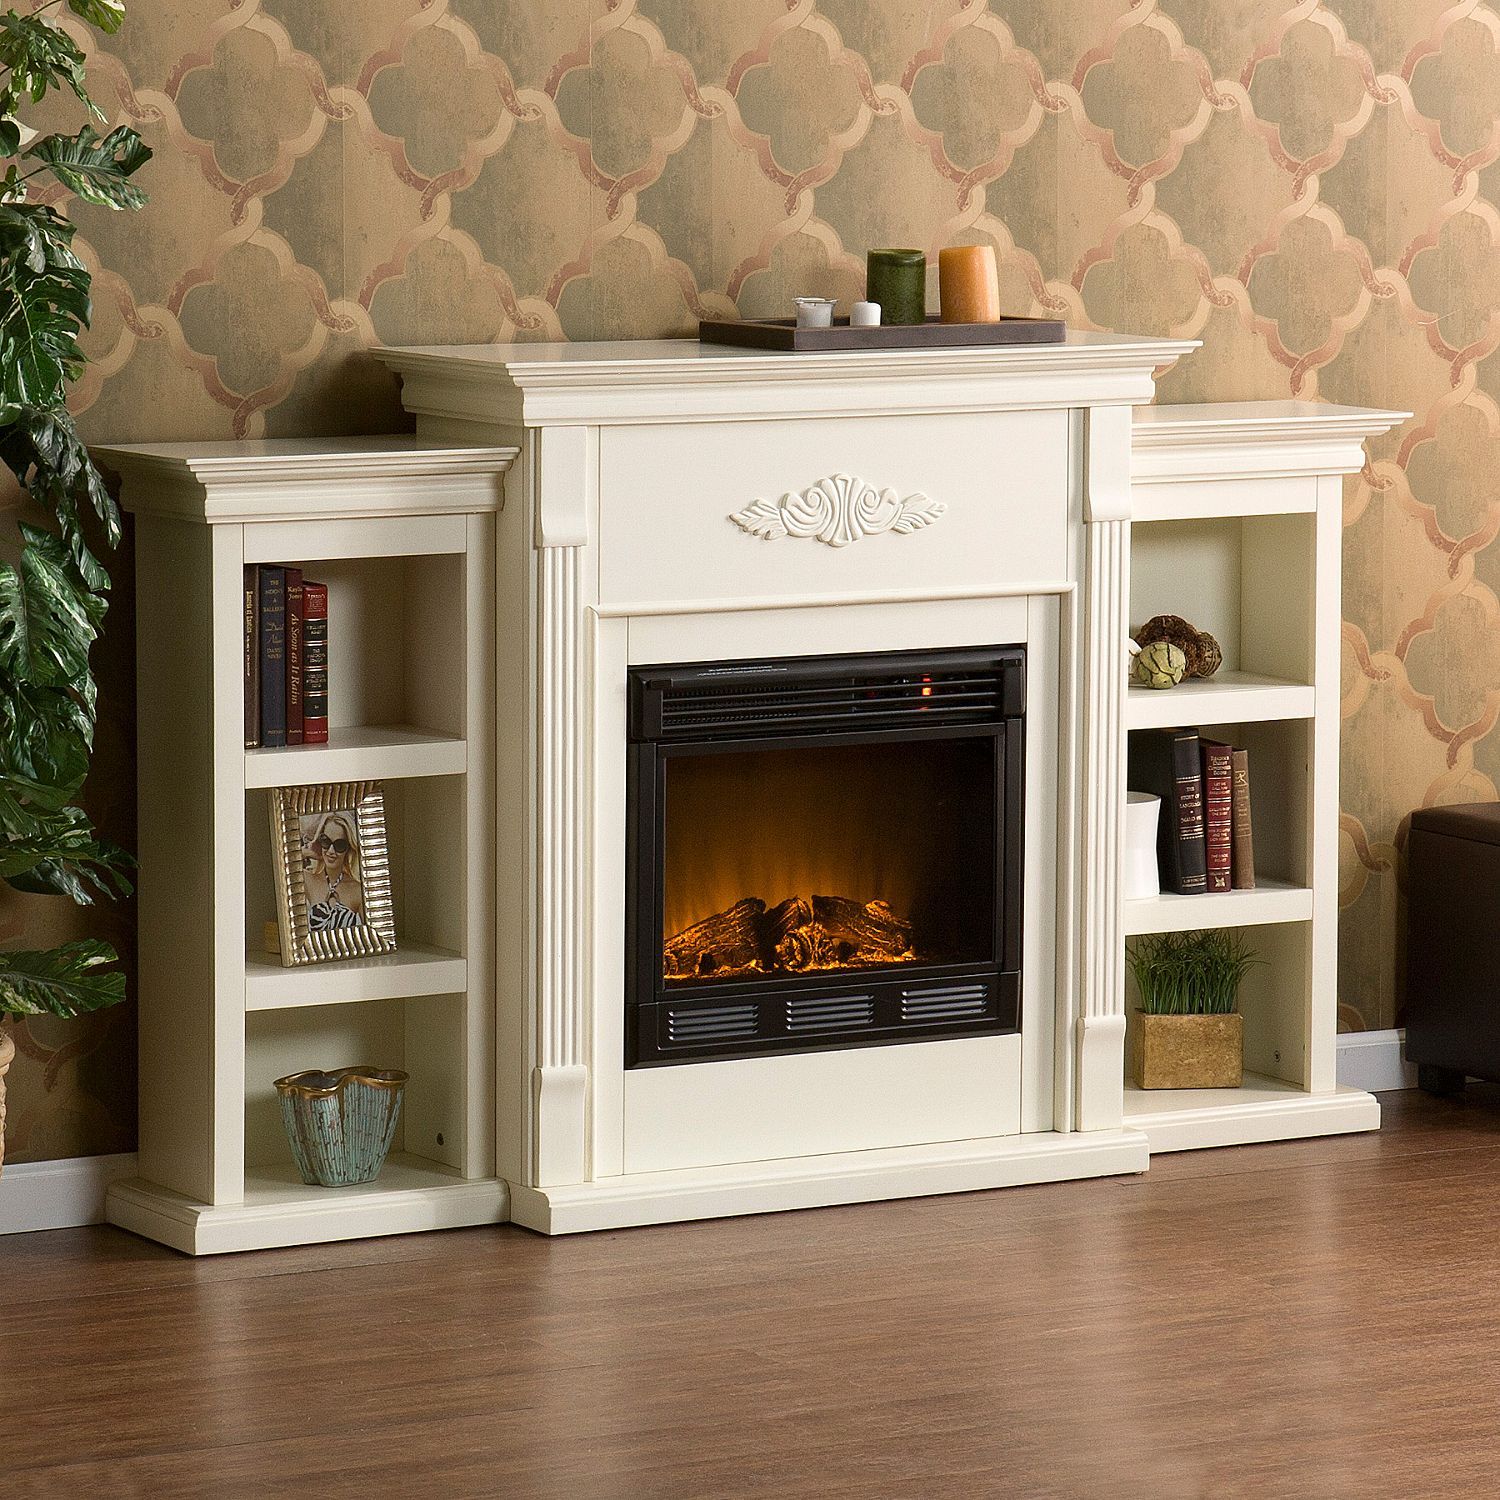 Grand White Electric Fireplace Fresh Emerson Electric Fireplace Ivory Sam S Club